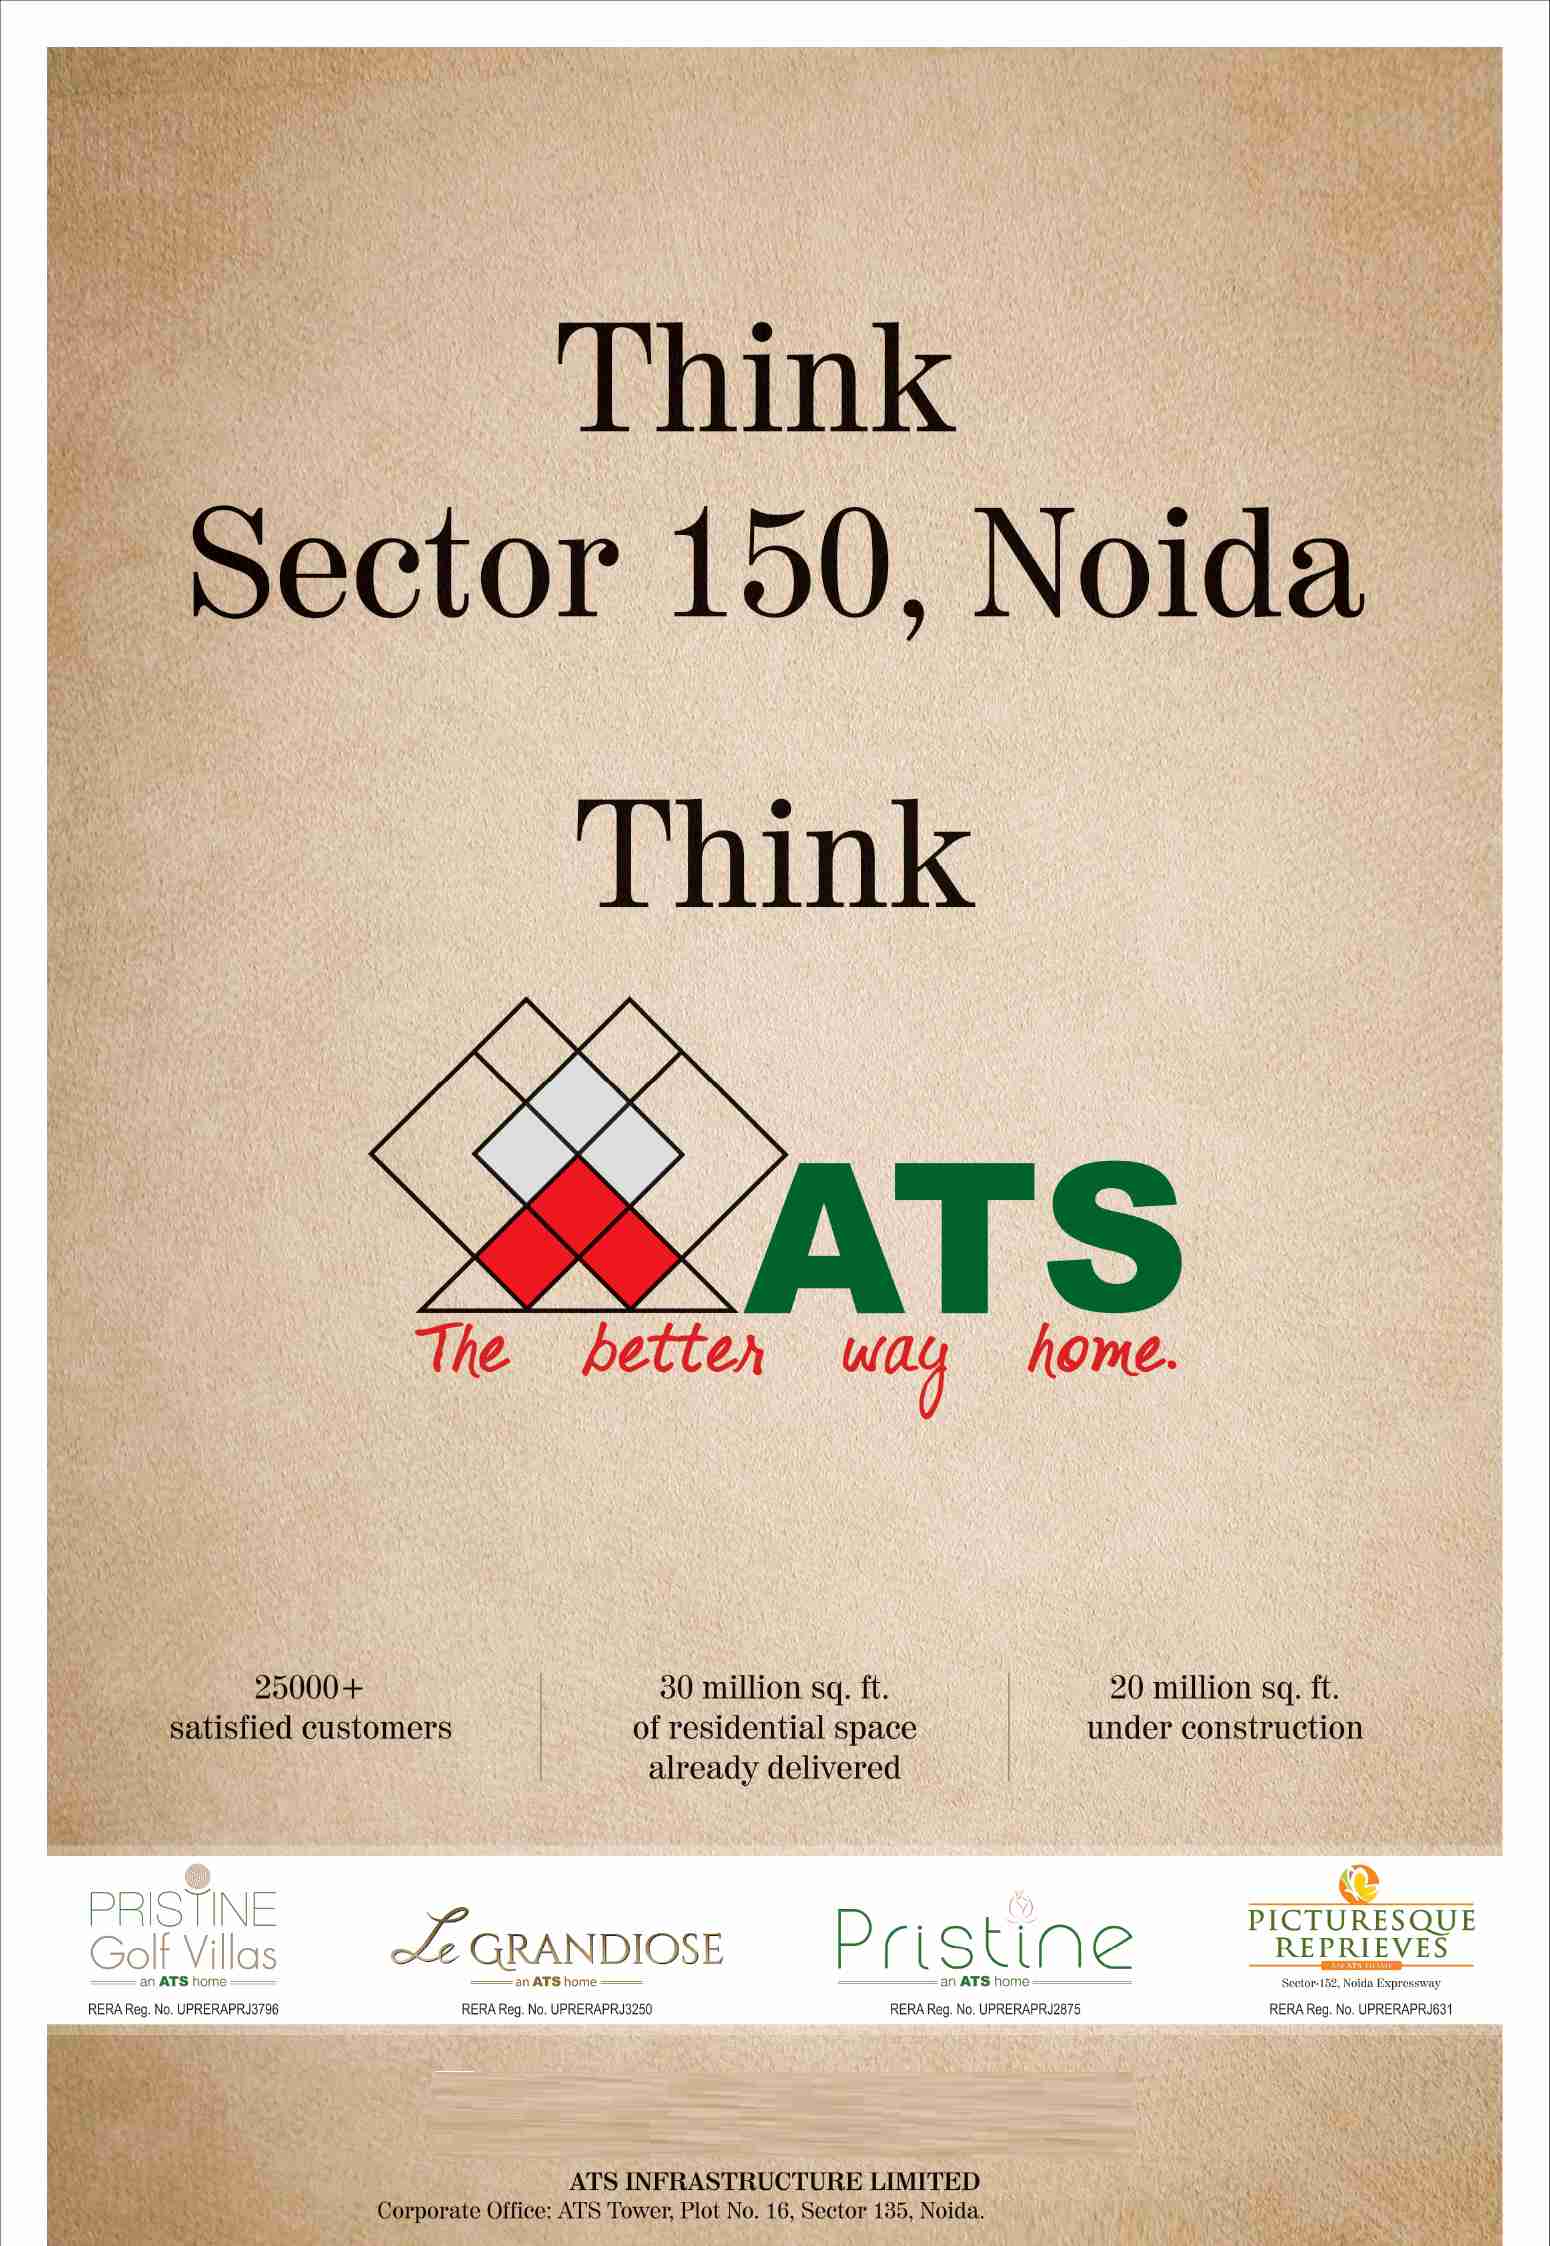 Invest in ATS Properties and live a luxurious life in Noida